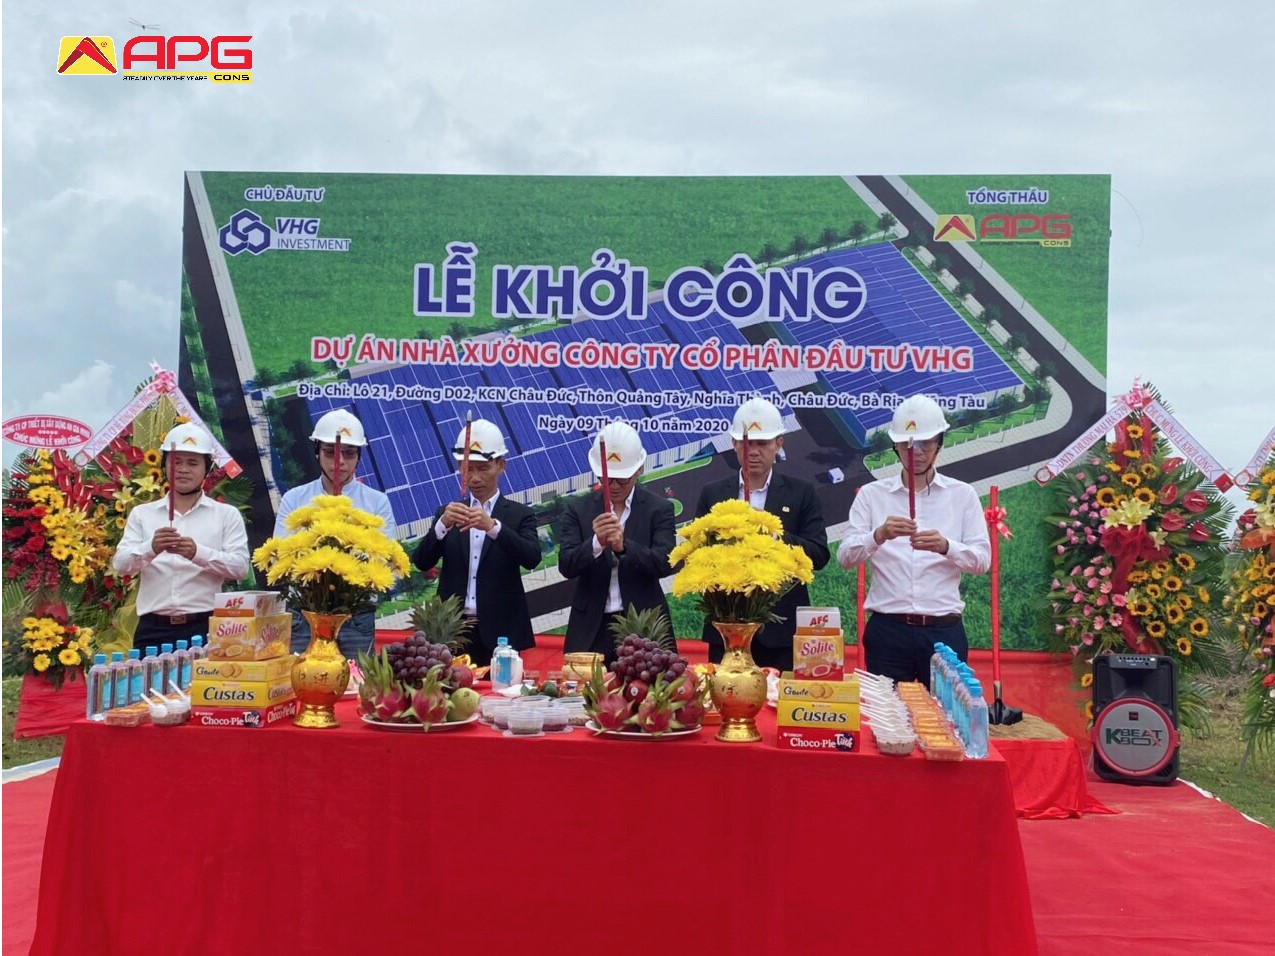 THE GROUNDBREAKING CEREMONY OF “WOODEN FURNITUER FACTORY PROJECT” IN CHAU DUC INDUSTRIAL PARK